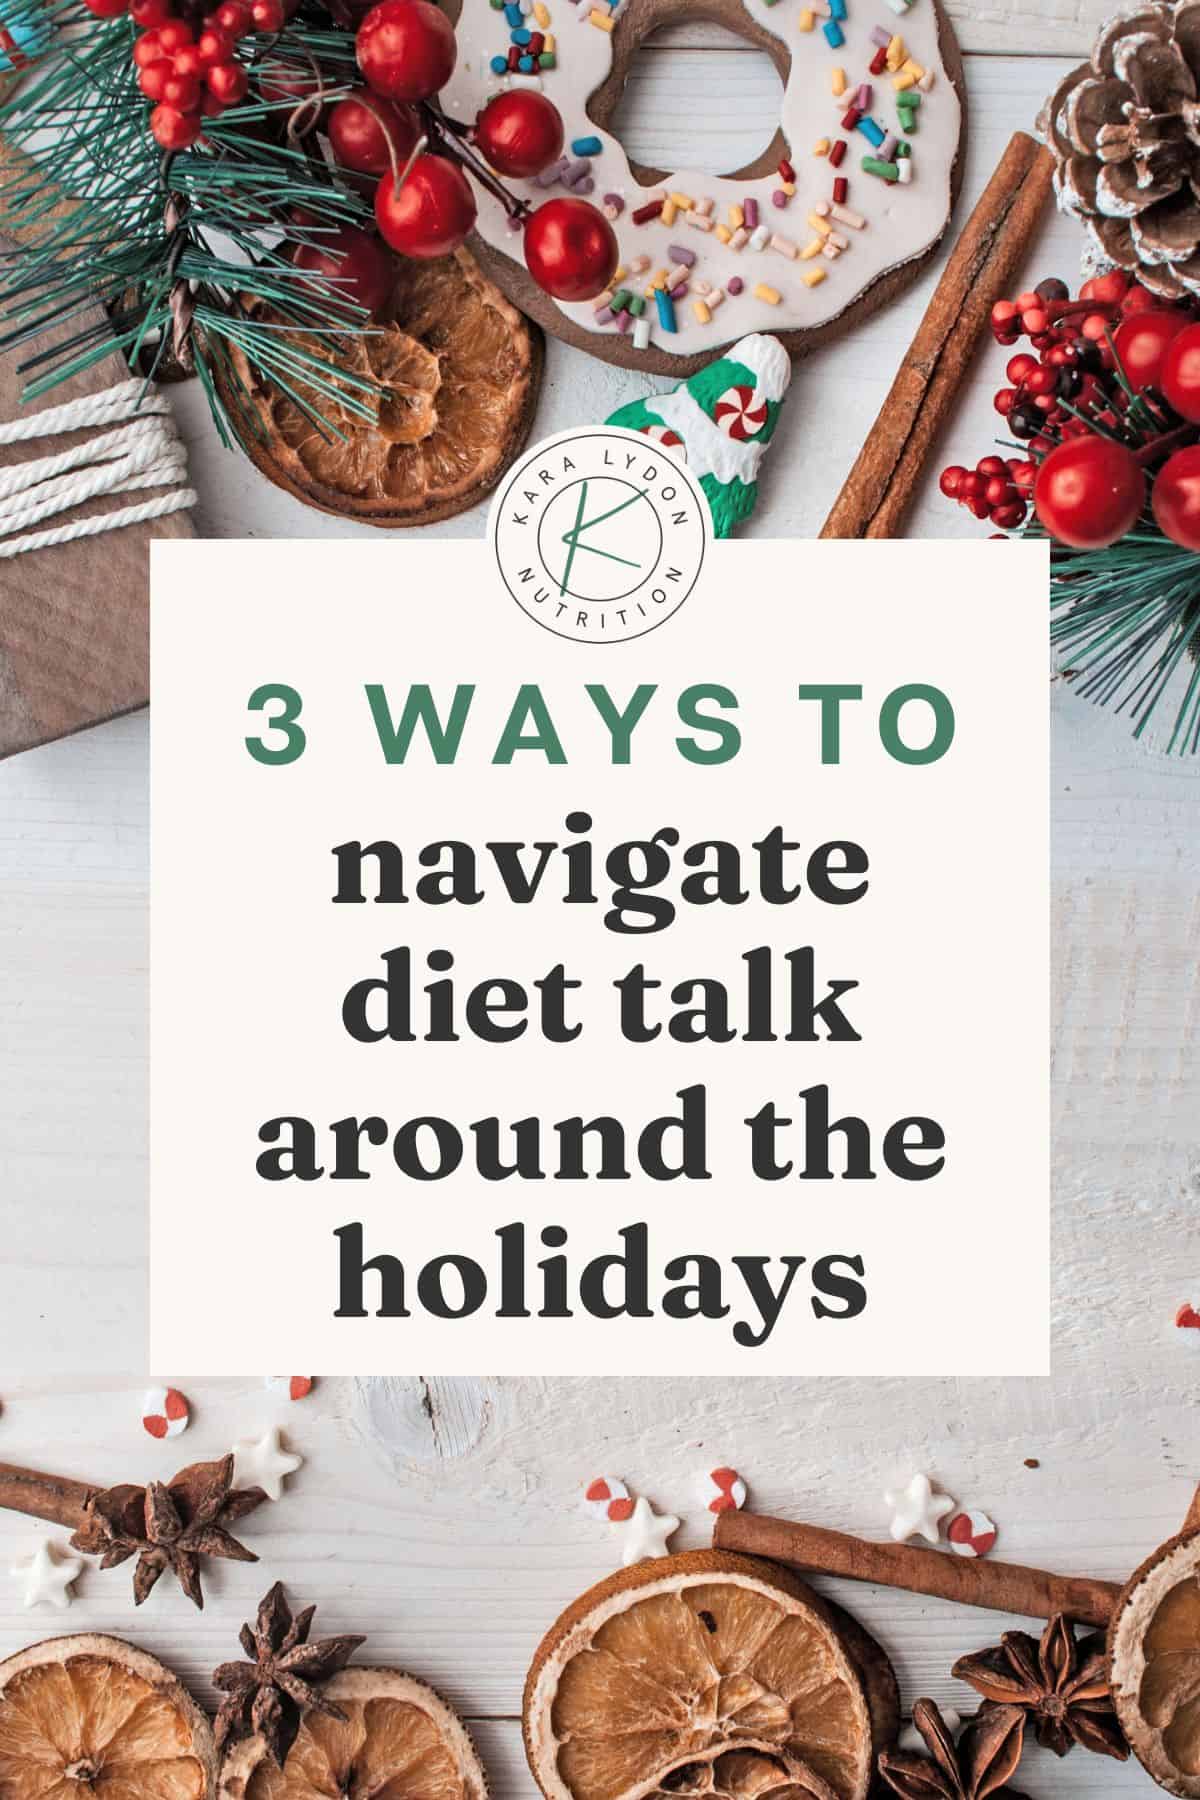 image with dried oranges and Christmas decoration with text that says "Three Ways to Navigate the Holiday Diet Talk"